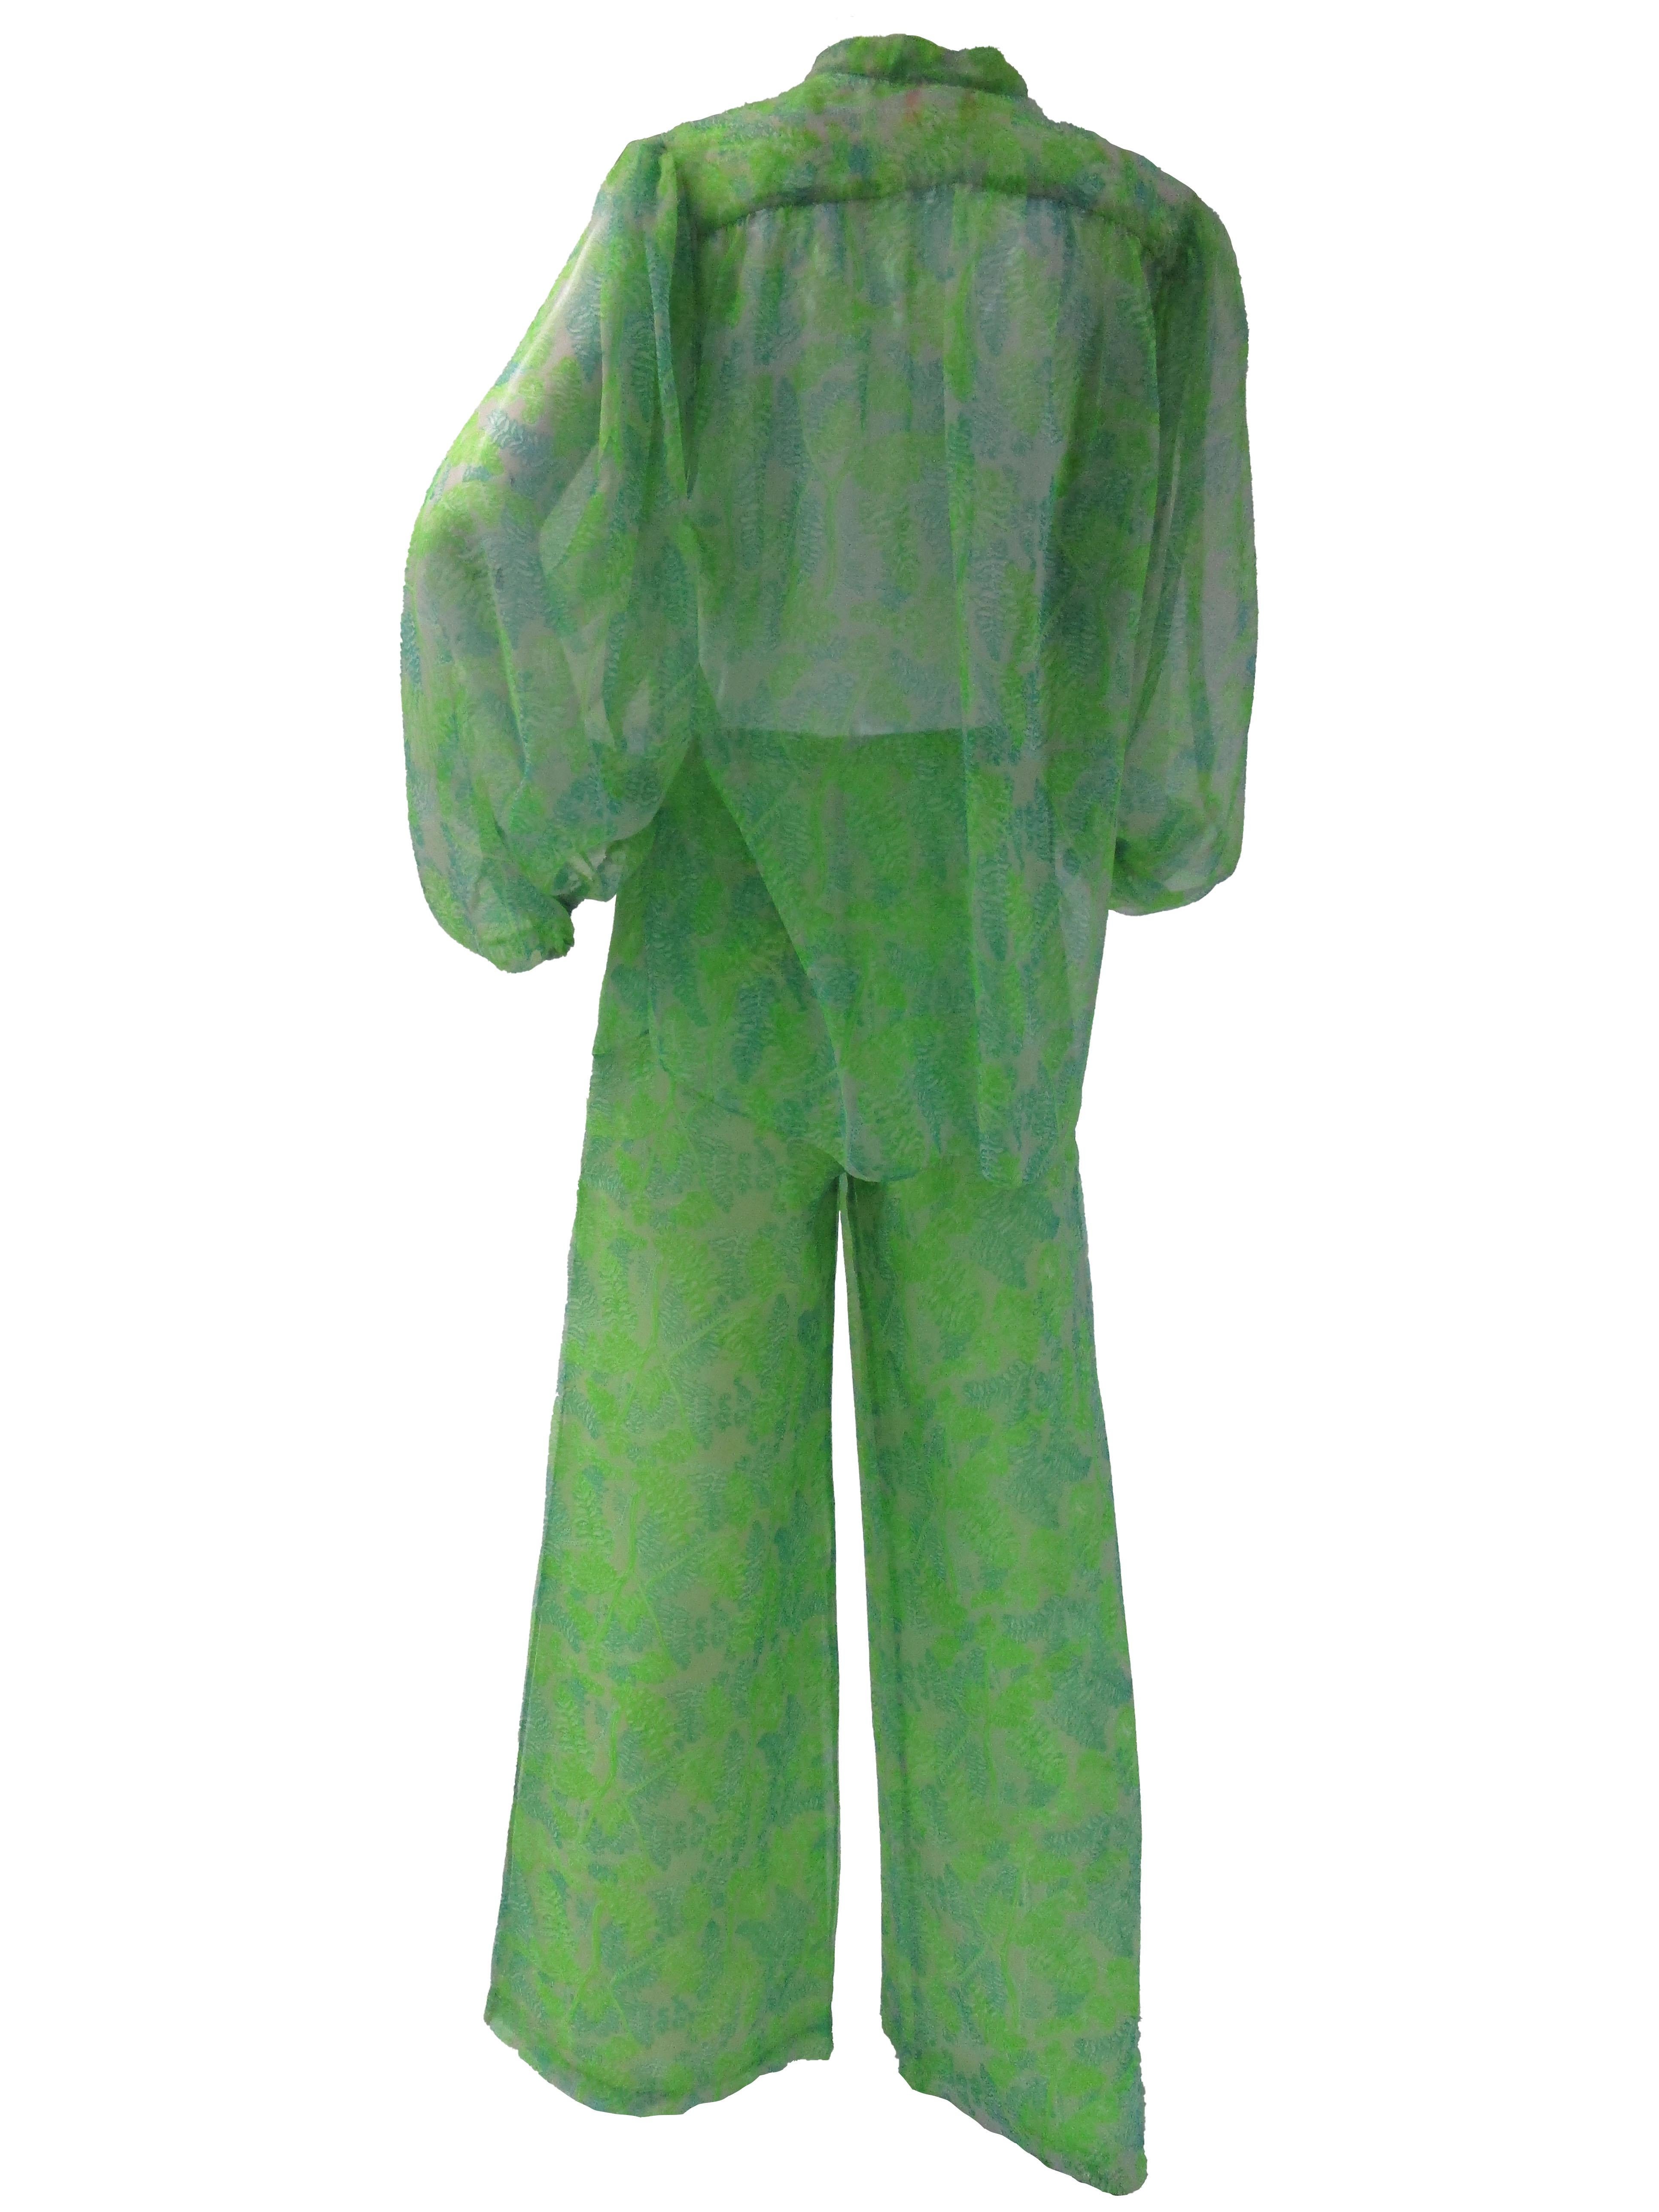 Rare 1970s “Liza” by Lilly Pulitzer Green Sheer Resort Ensemble  In Excellent Condition For Sale In Houston, TX